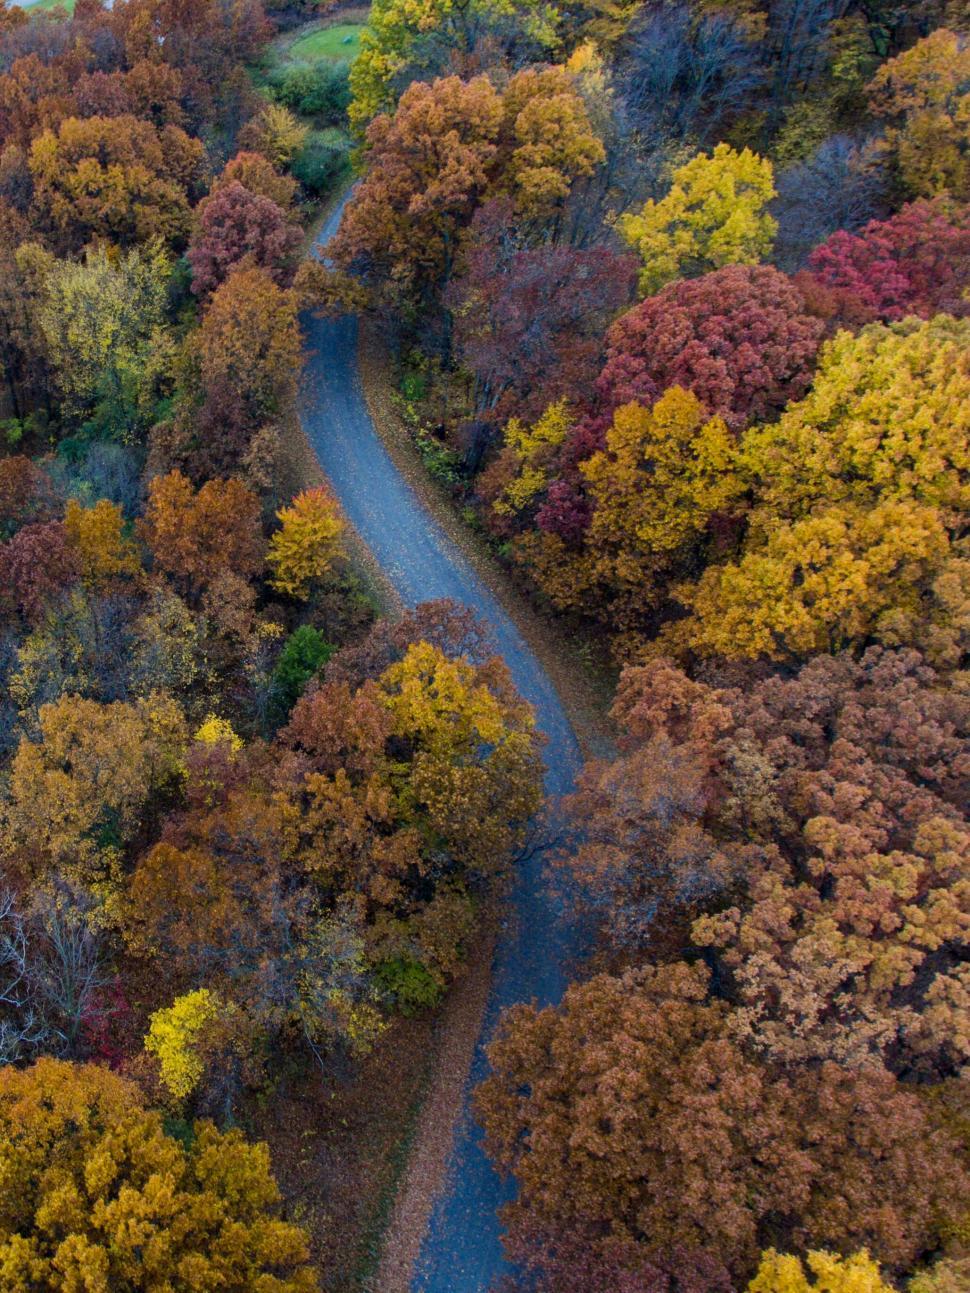 Free Image of A road through a forest of colorful trees 